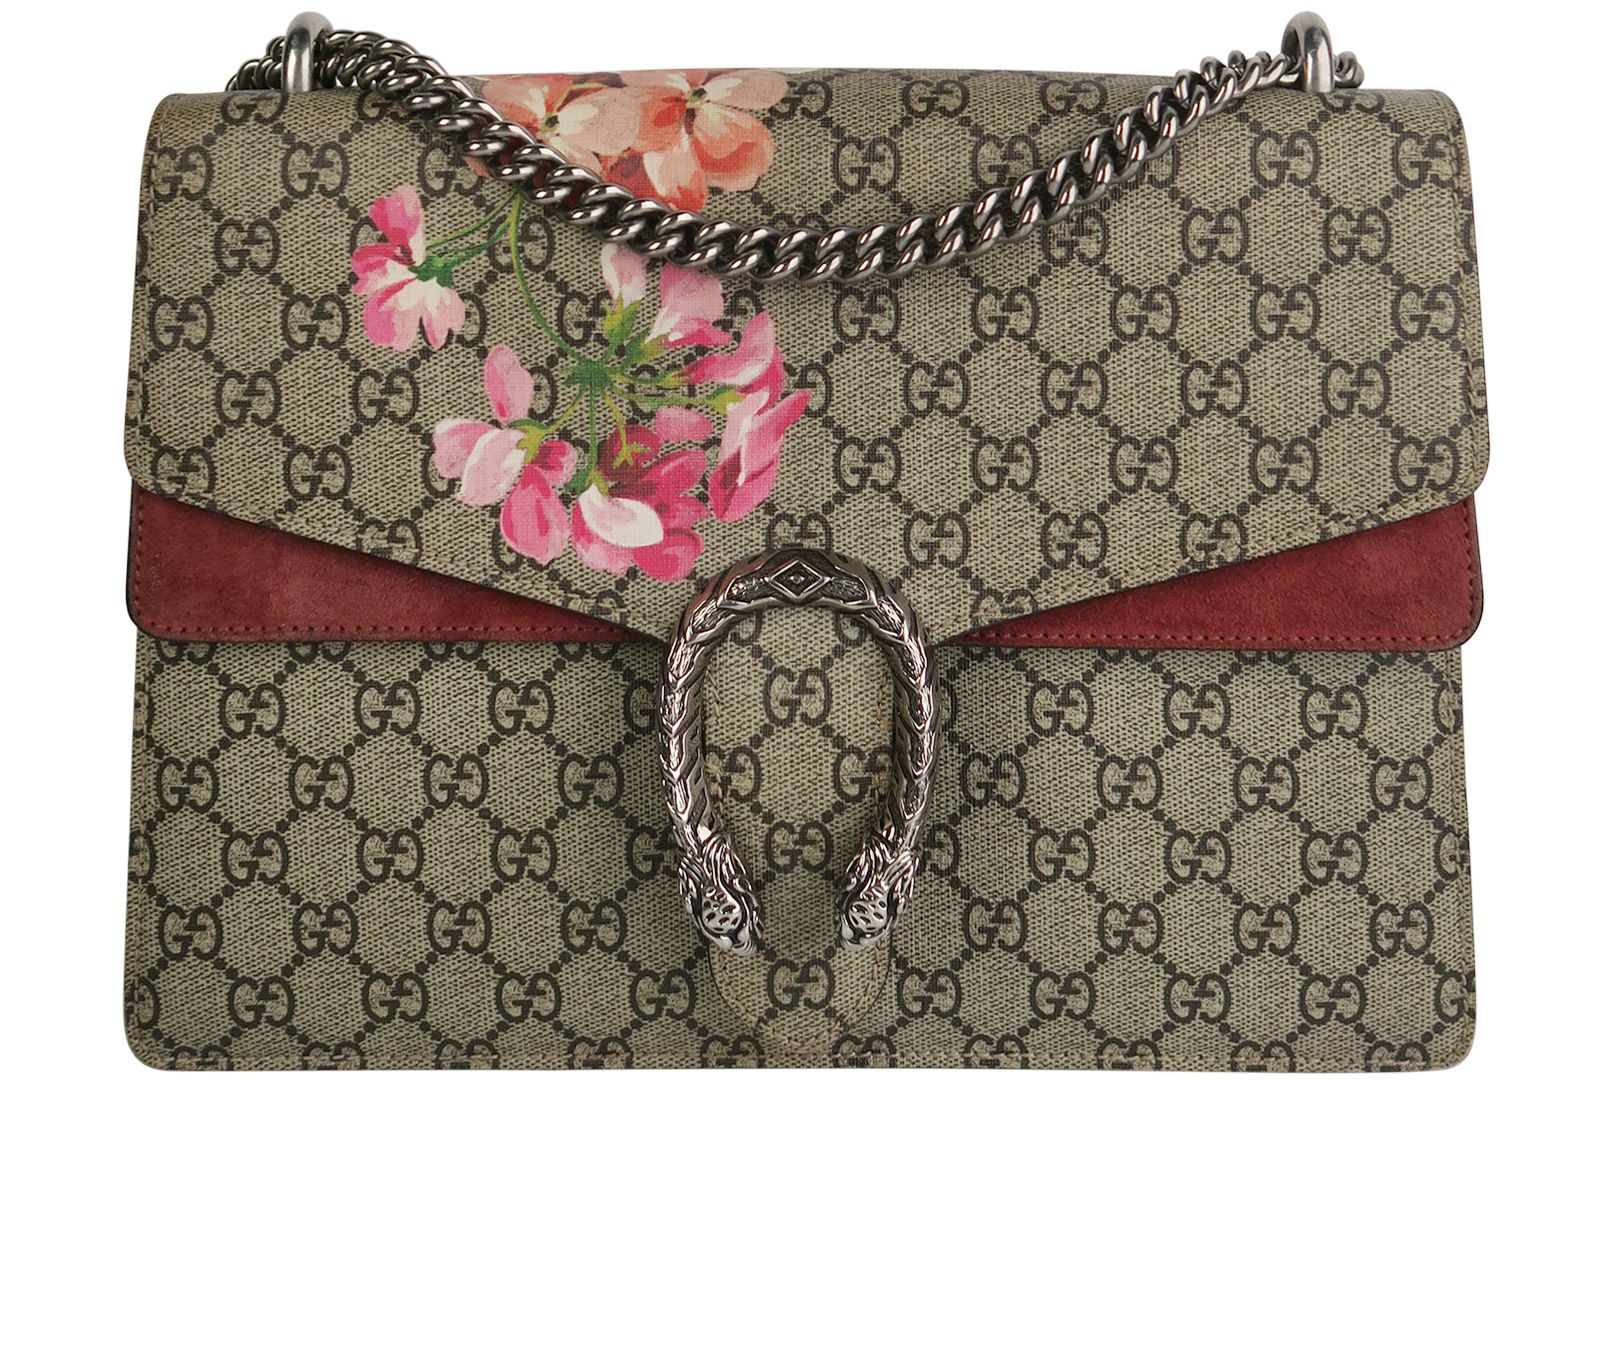 Gucci Clutch Bags, Shop our small Gucci clutch bags